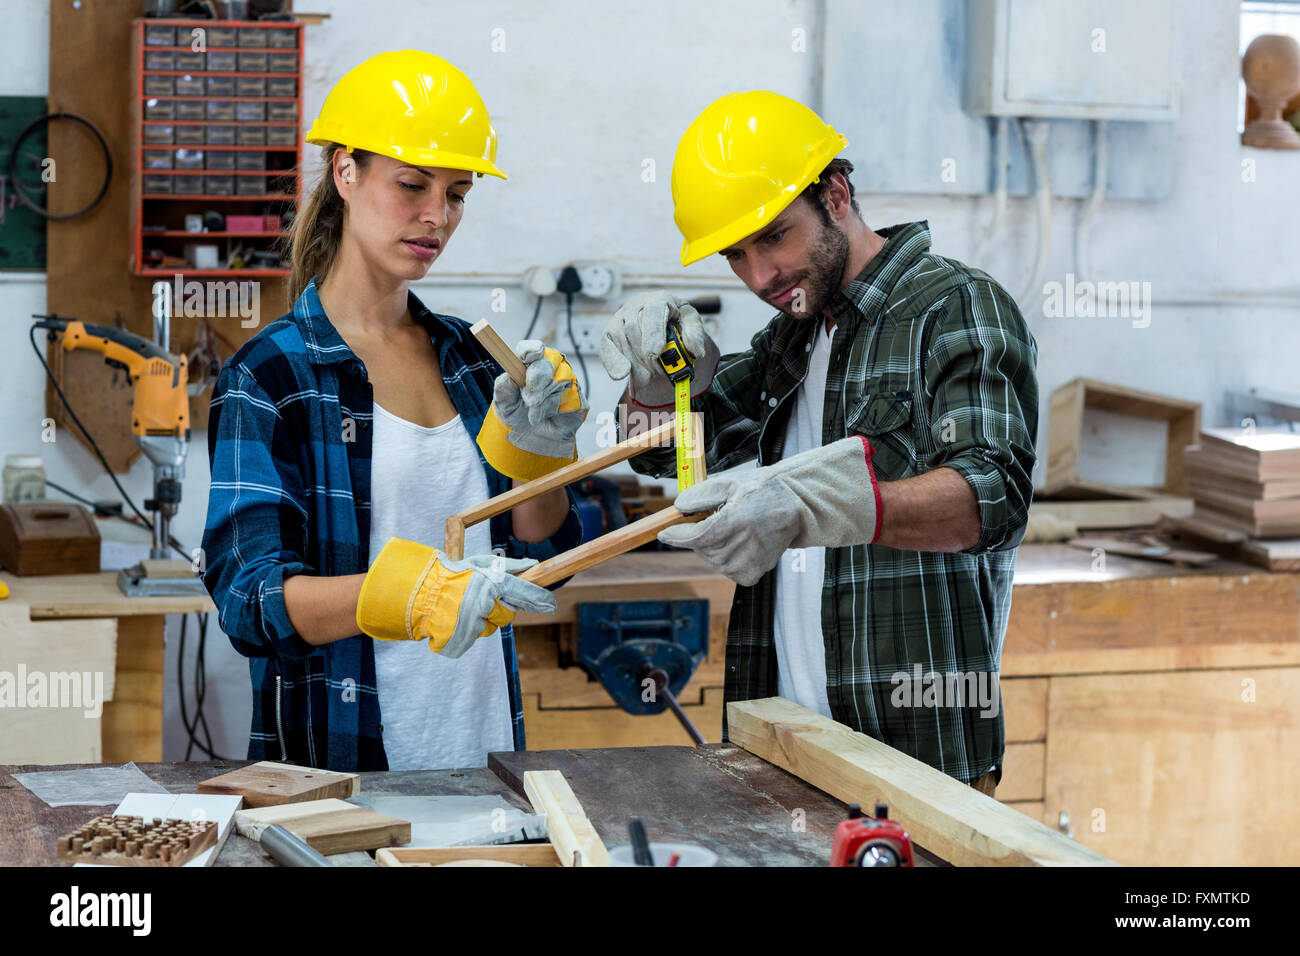 Male And Female Carpenters Measuring A Wooden Plank Stock Photo Alamy